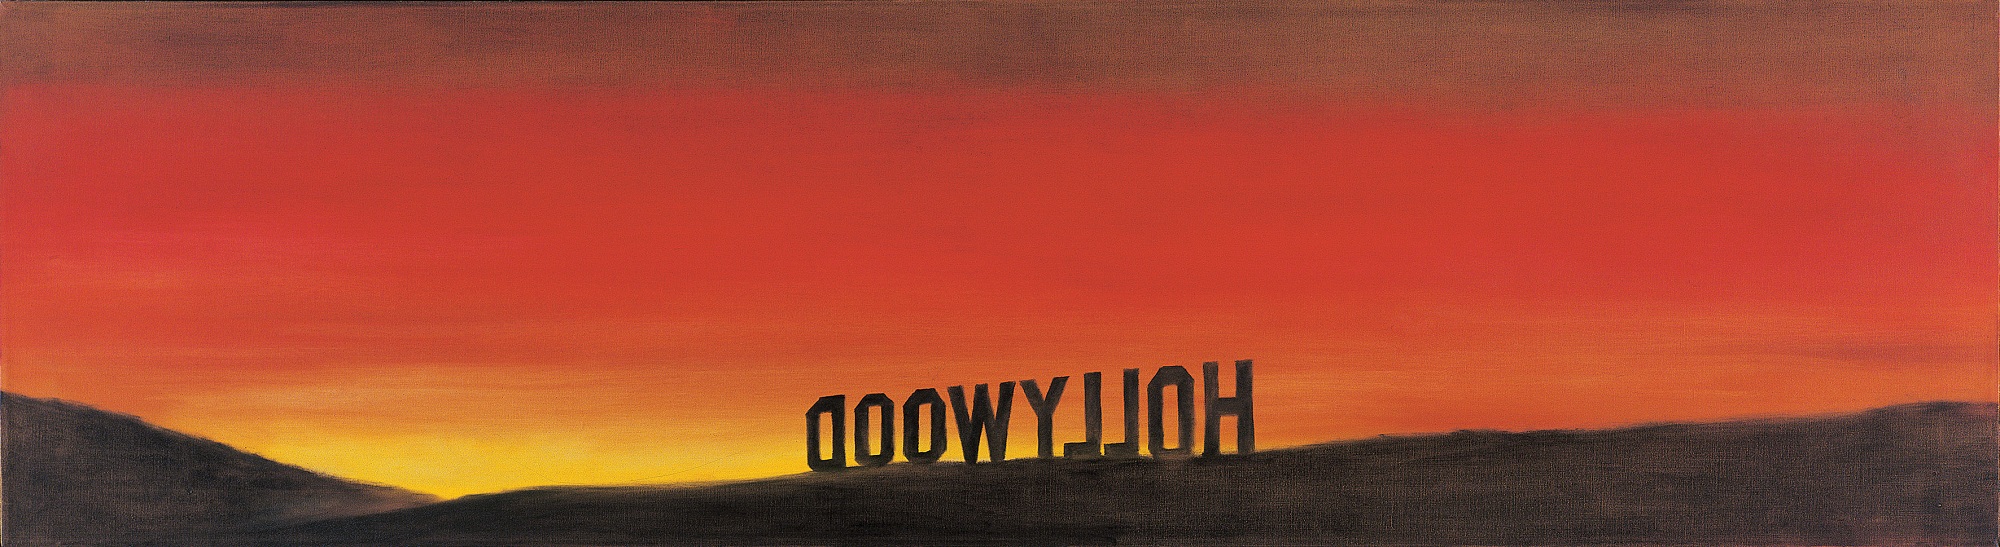 Ed Ruscha, The Back of Hollywood, 1977. Collection macLYON